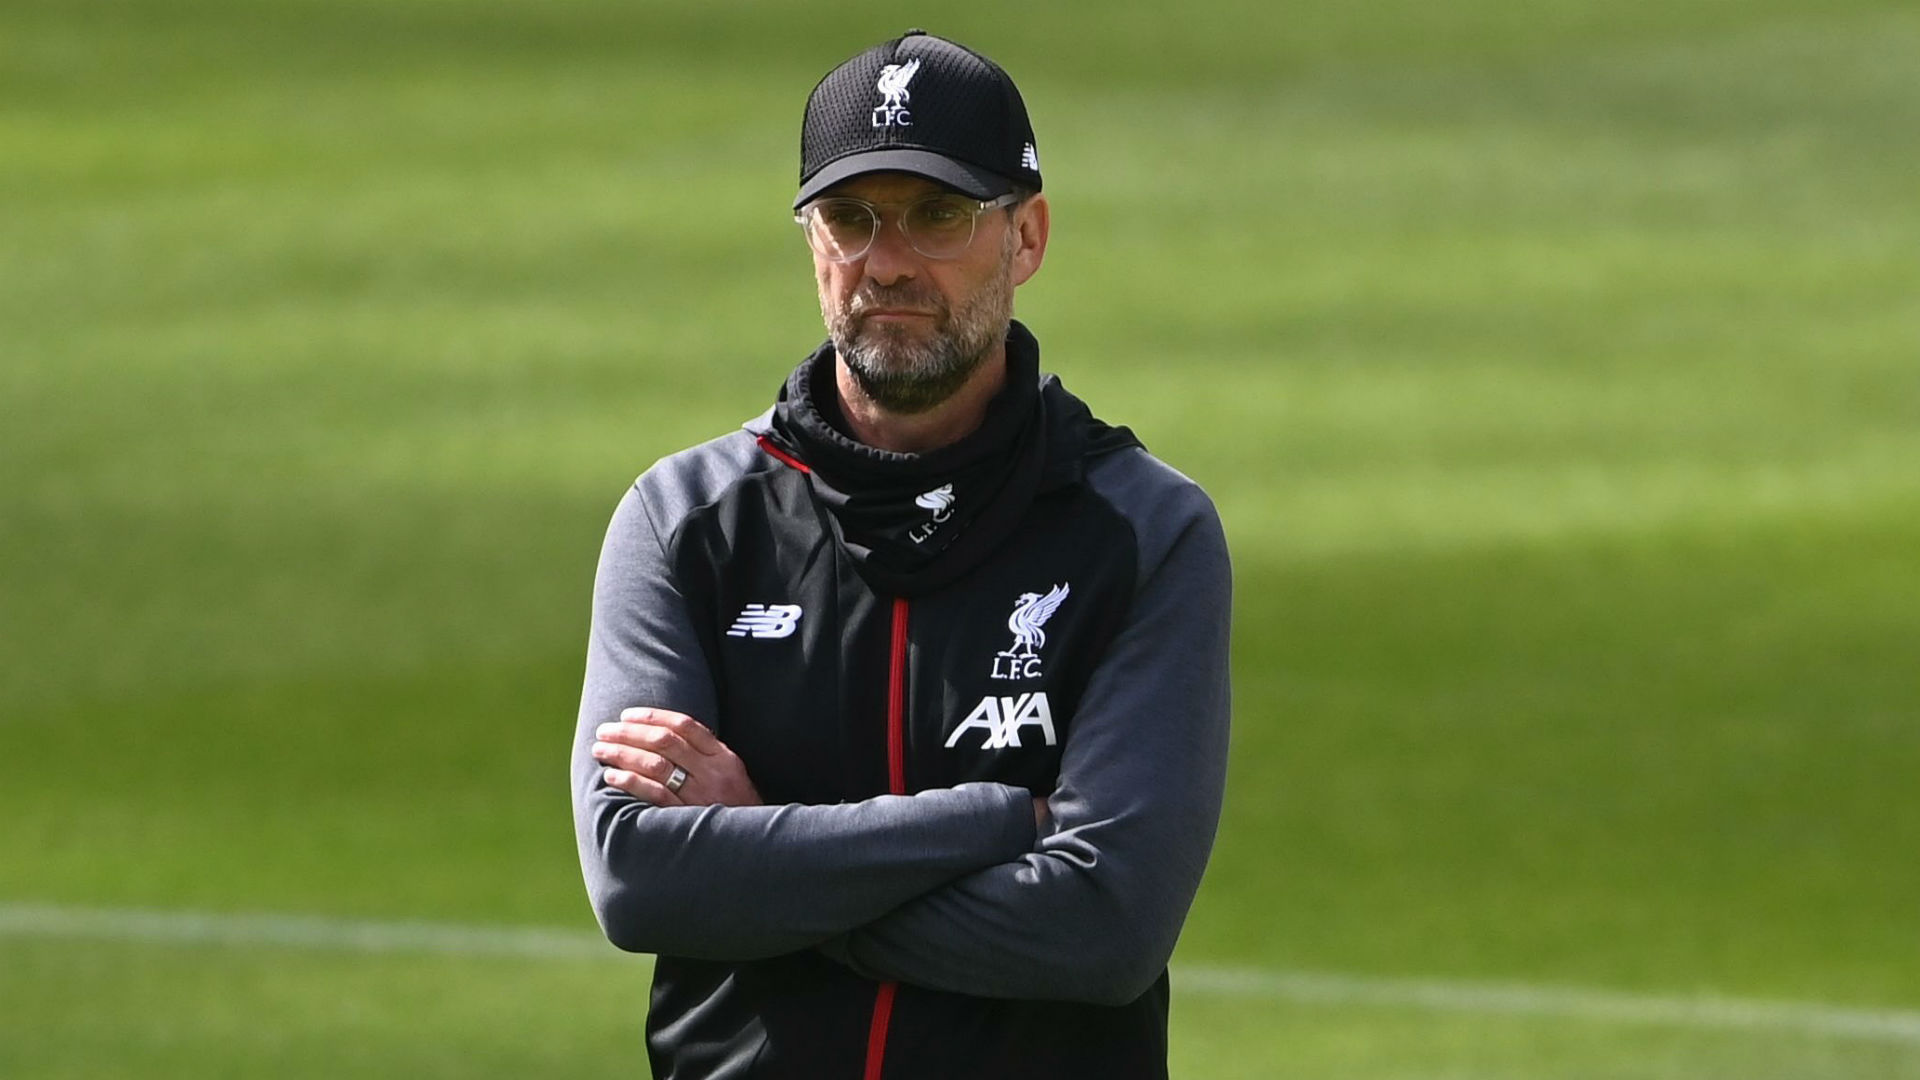 Liverpool manager Jurgen Klopp plans to keep rotating players to deal with injuries from an intense schedule of games.